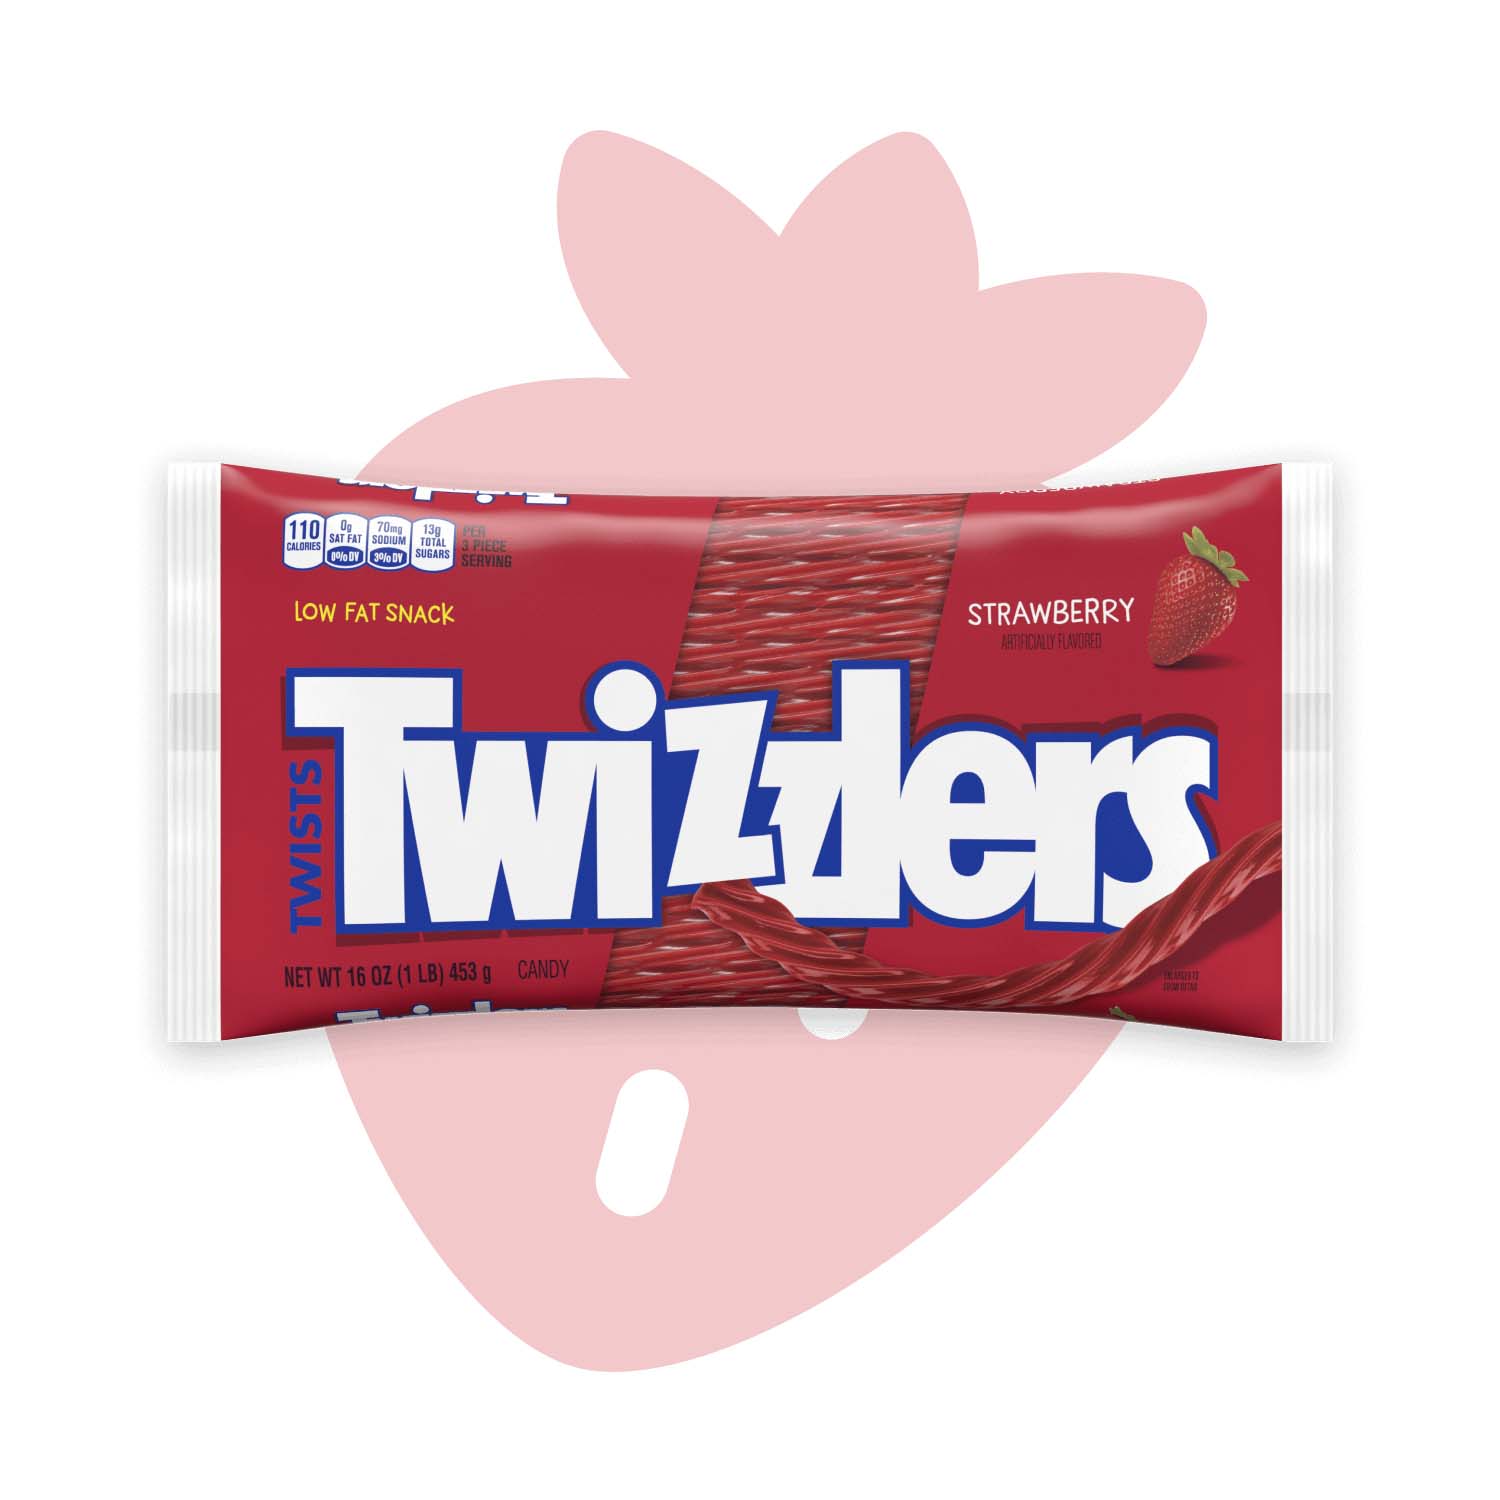 bag of twizzlers twists strawberry flavored candy